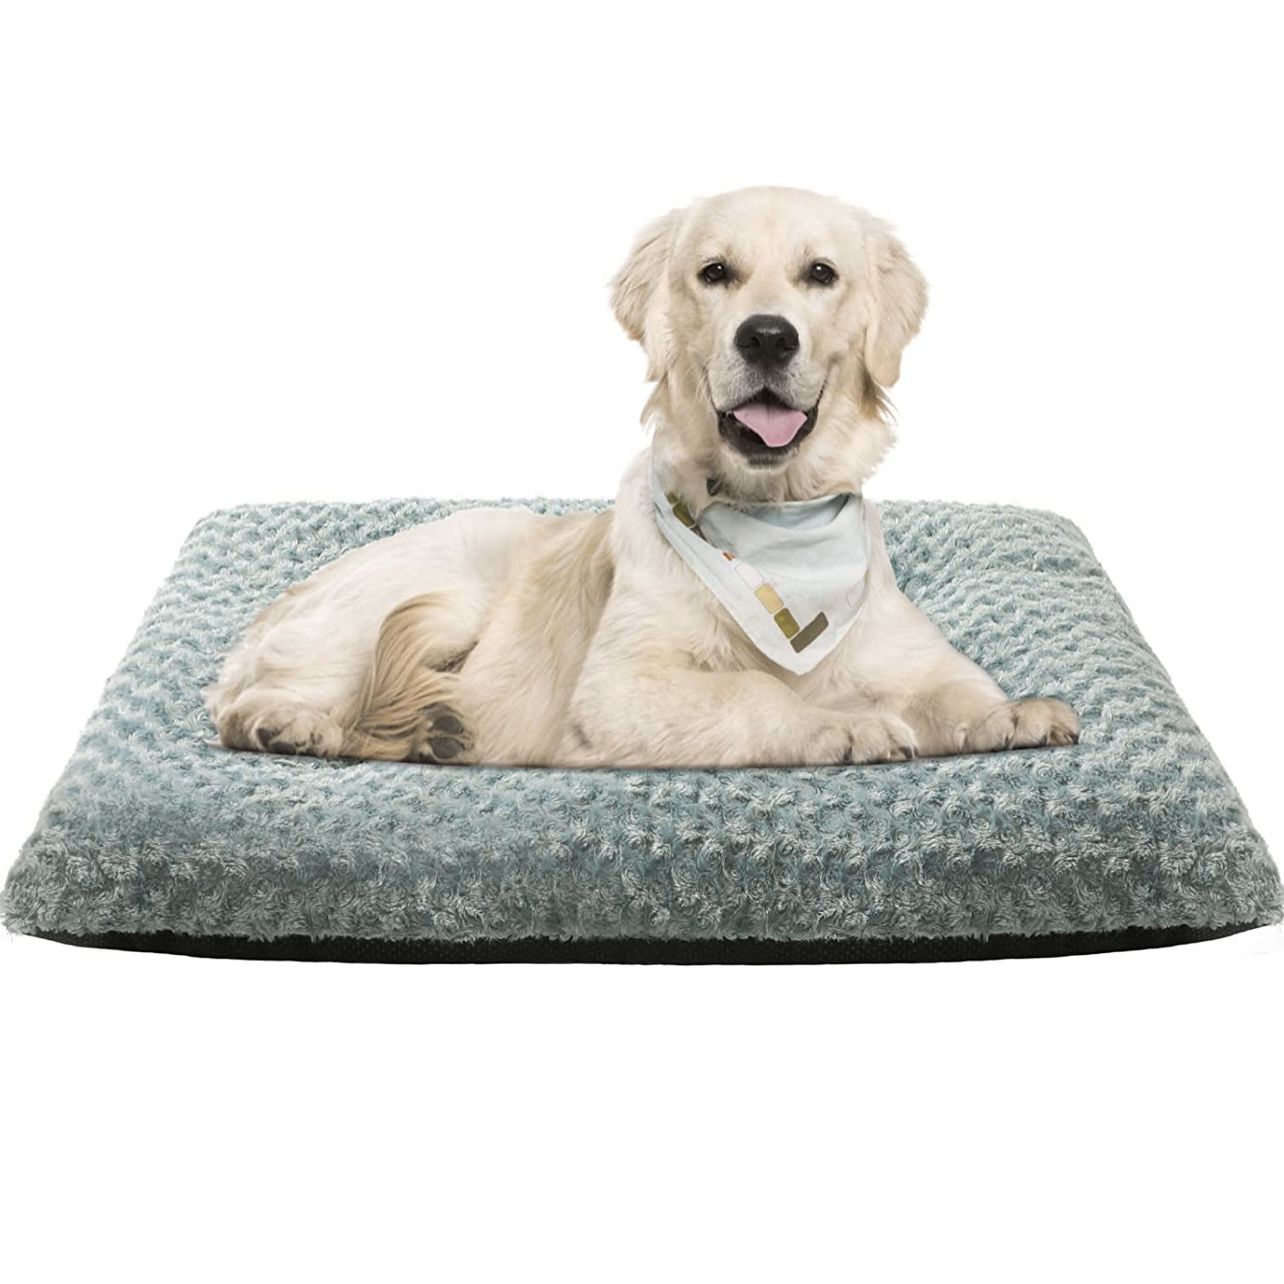 Dog Bed Mat,Kennel Bed Crate Pet Bed Mattress Cat Bed Soft Comfortabl Pet Bed Pad with Non-Slip Bottom, Machine Washable Kennel Pad. JUMBO 42X54X5" , 